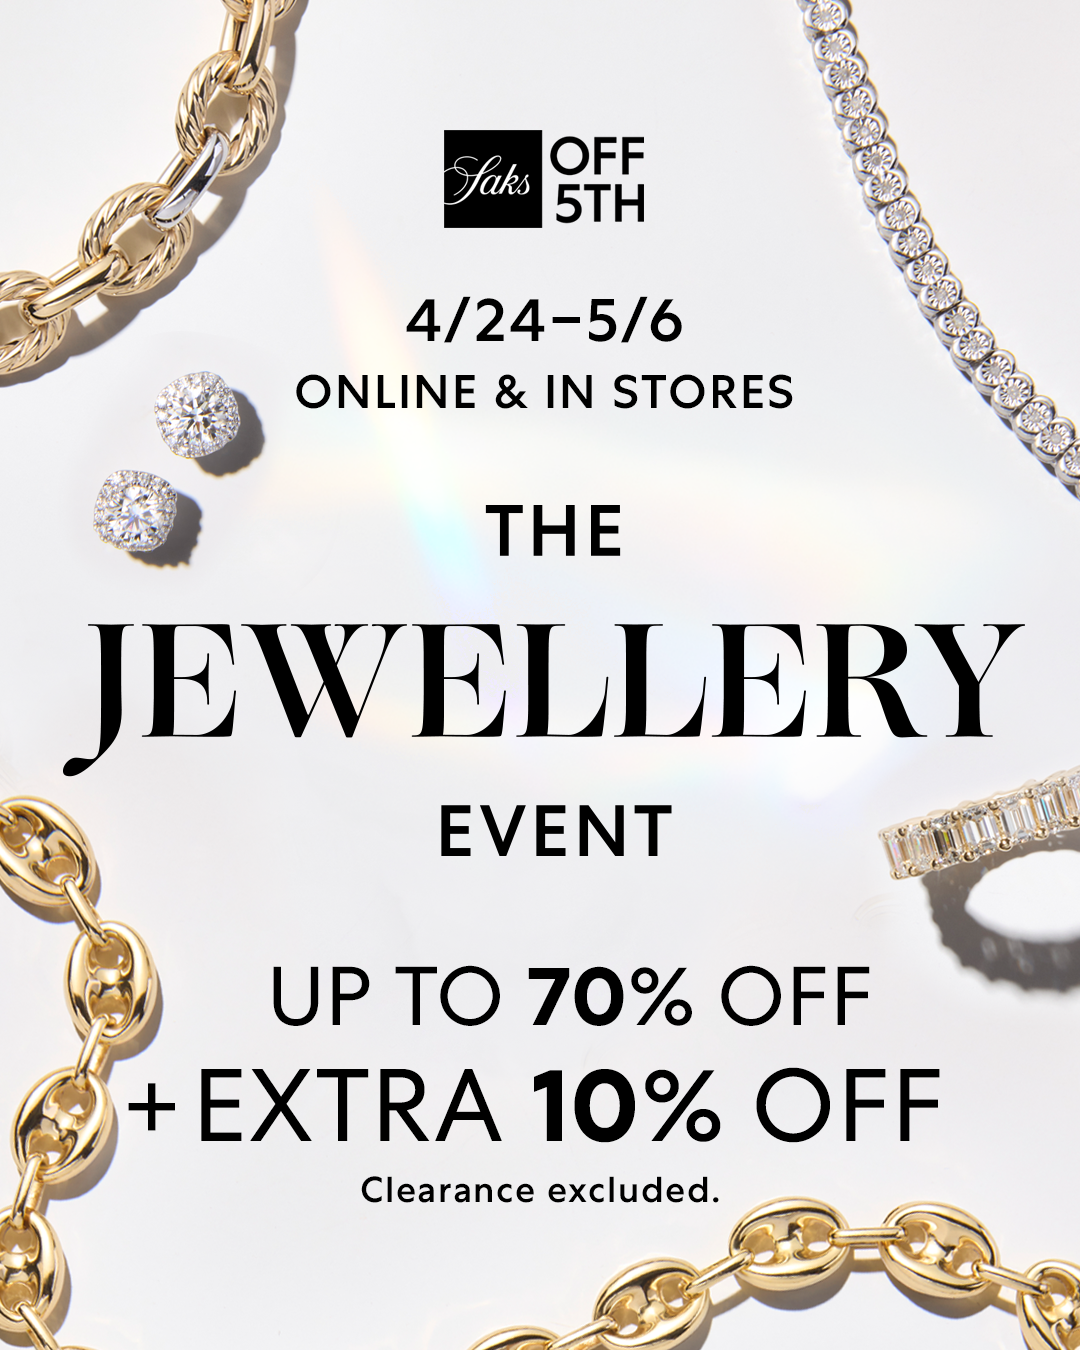 Shop jewellery at Saks OFF 5TH with up to 60% off - Park Royal